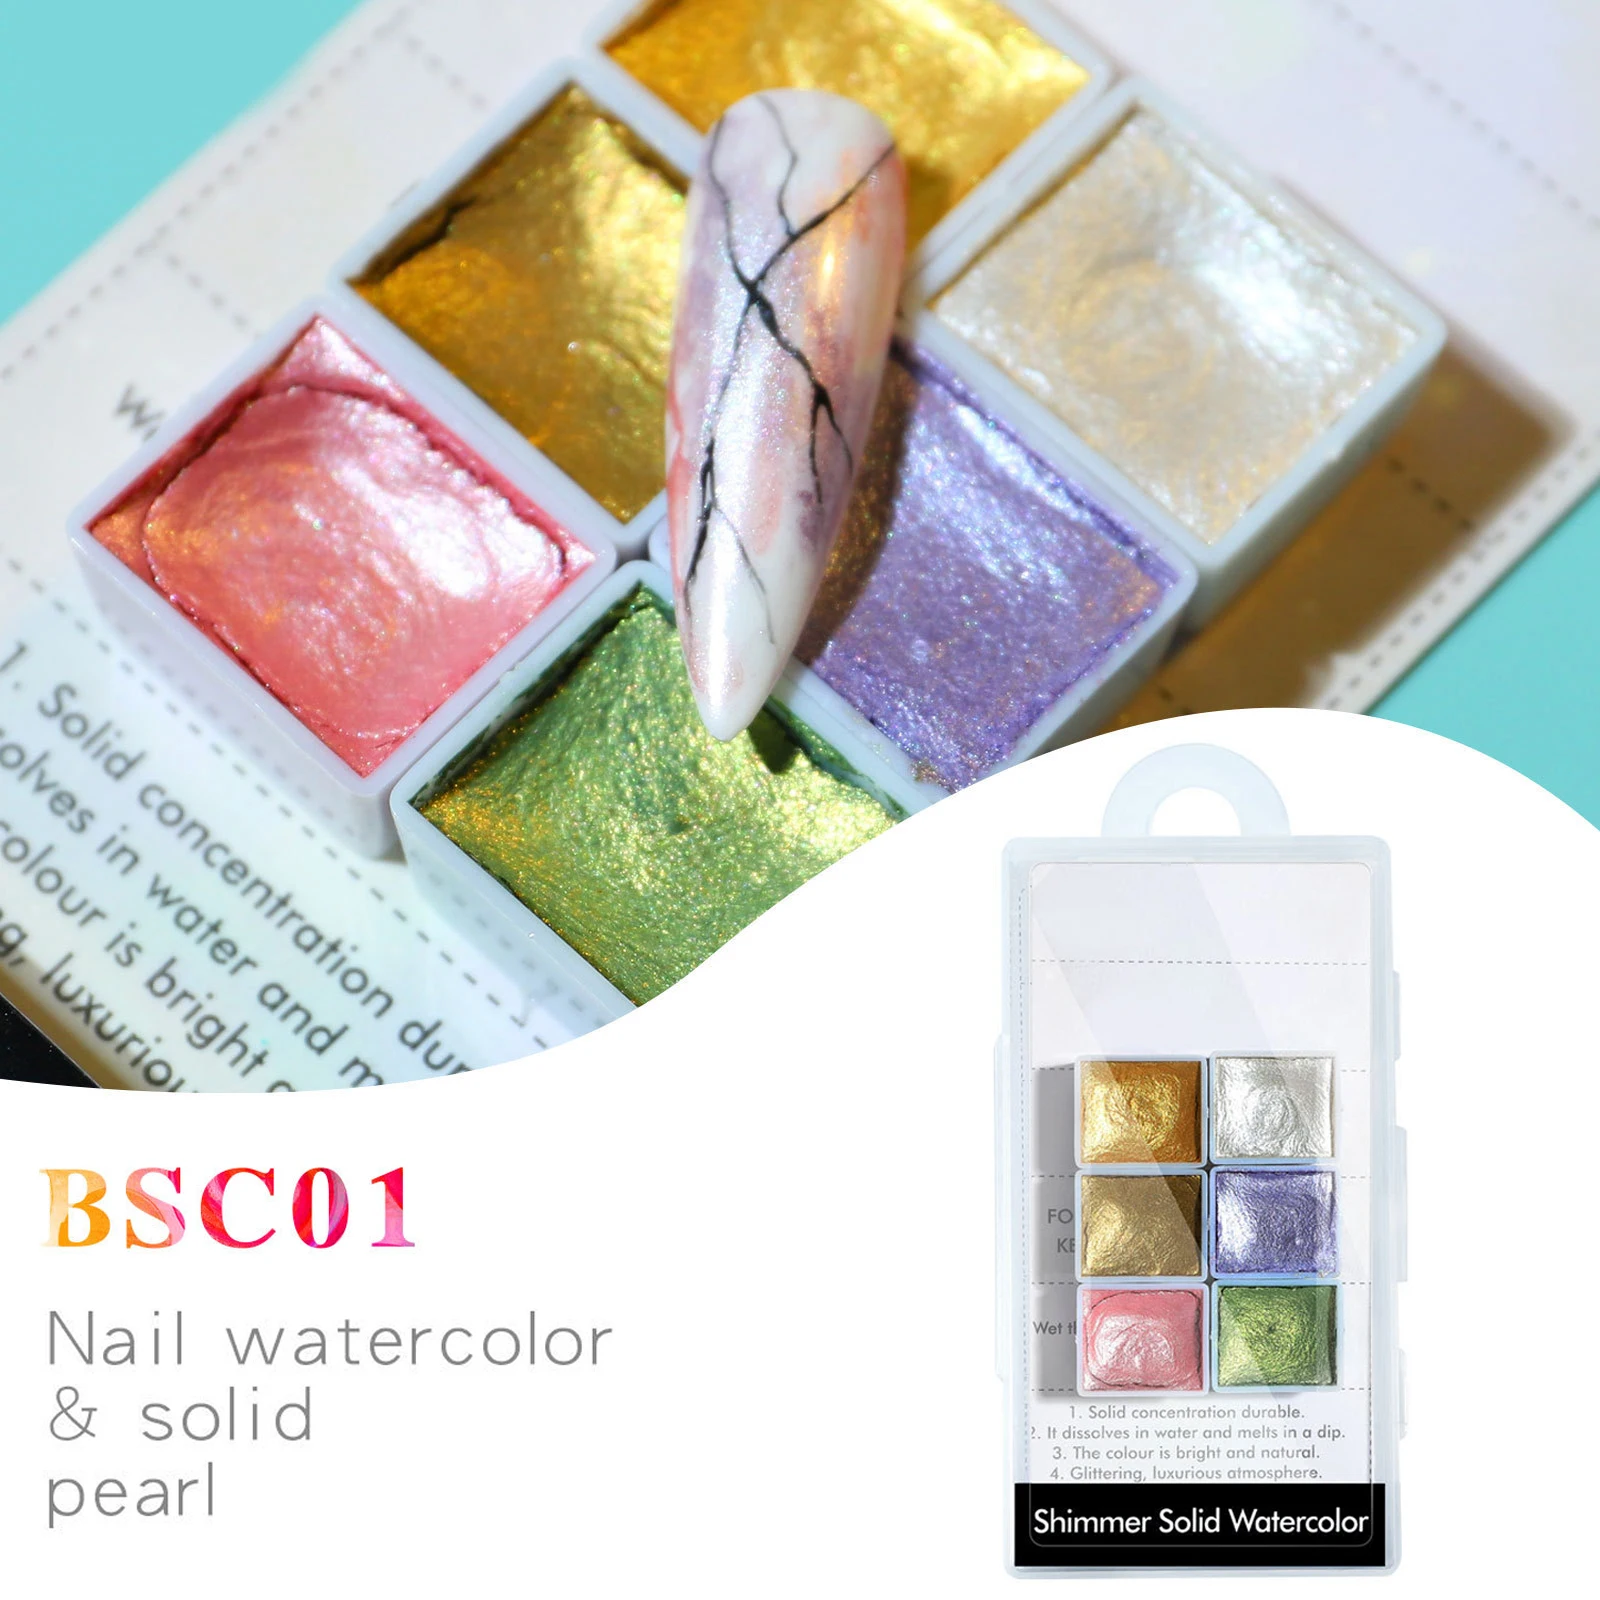 6 Colors Shimmer Solid Watercolor Painting Palette Travel Pocket Set DIY Nail Art for Artists Beginners